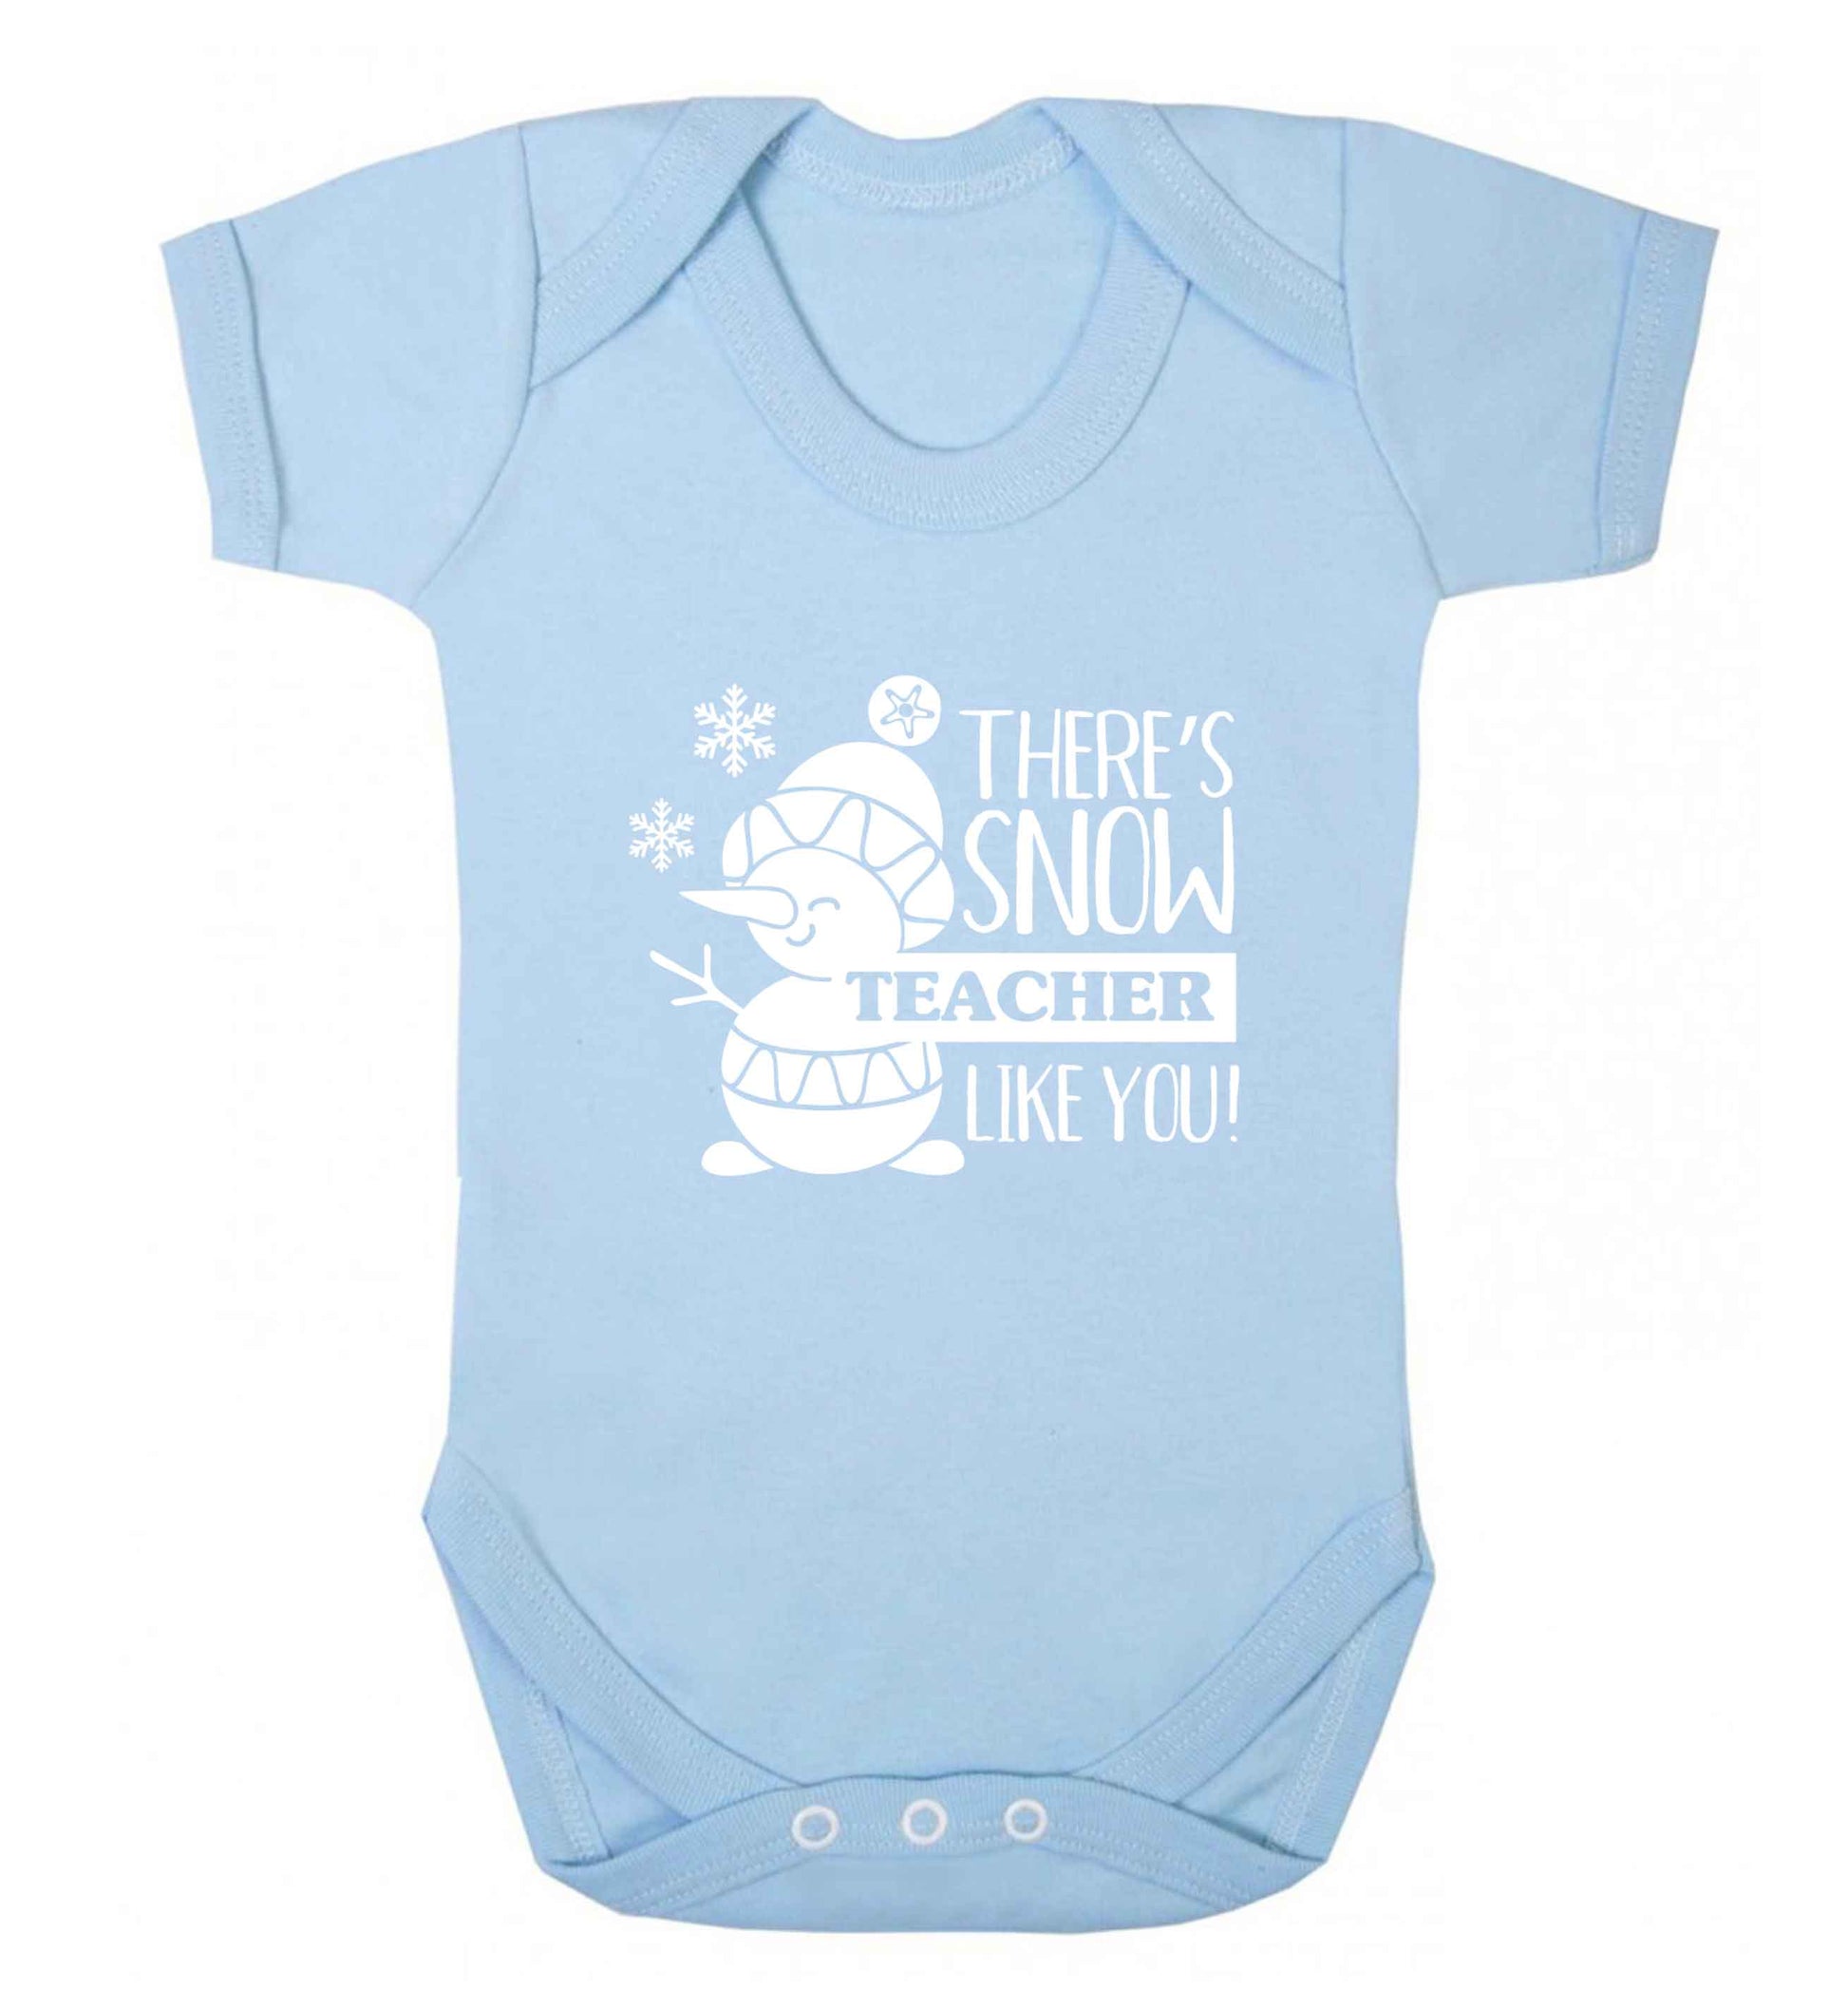 There's snow teacher like you baby vest pale blue 18-24 months